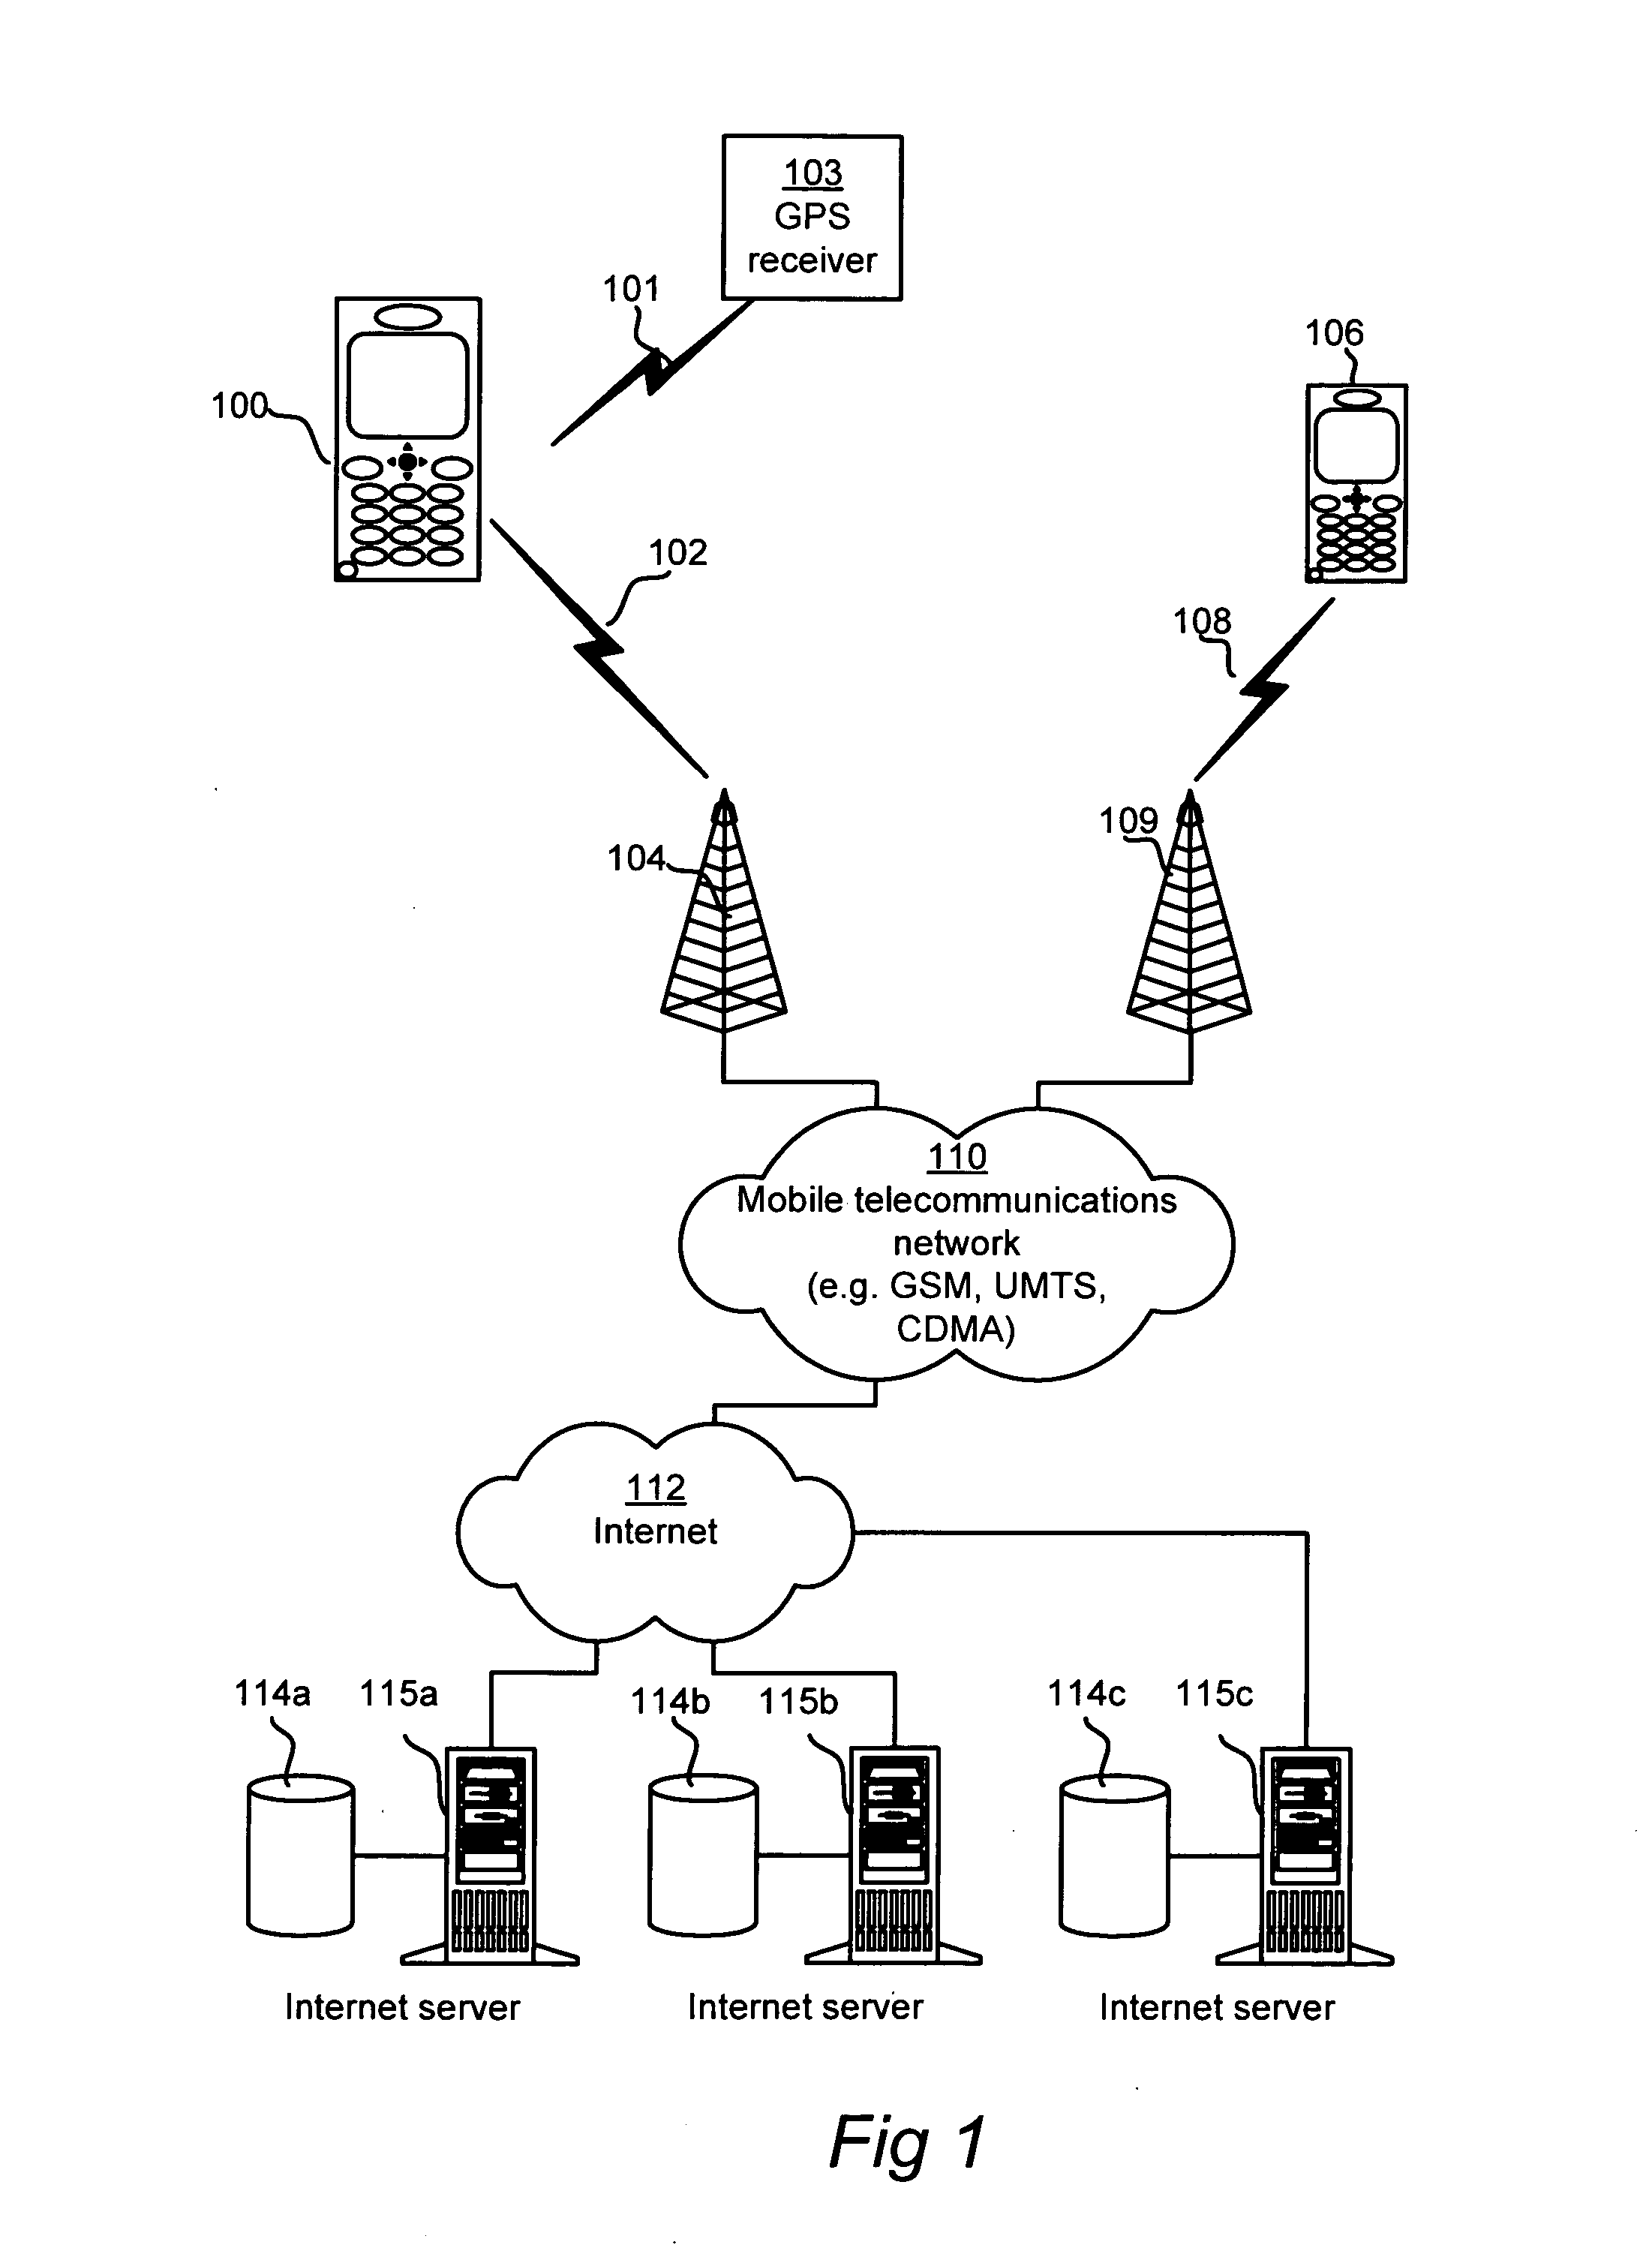 Apparatus and method for searching among and presenting information associated with geographical position data